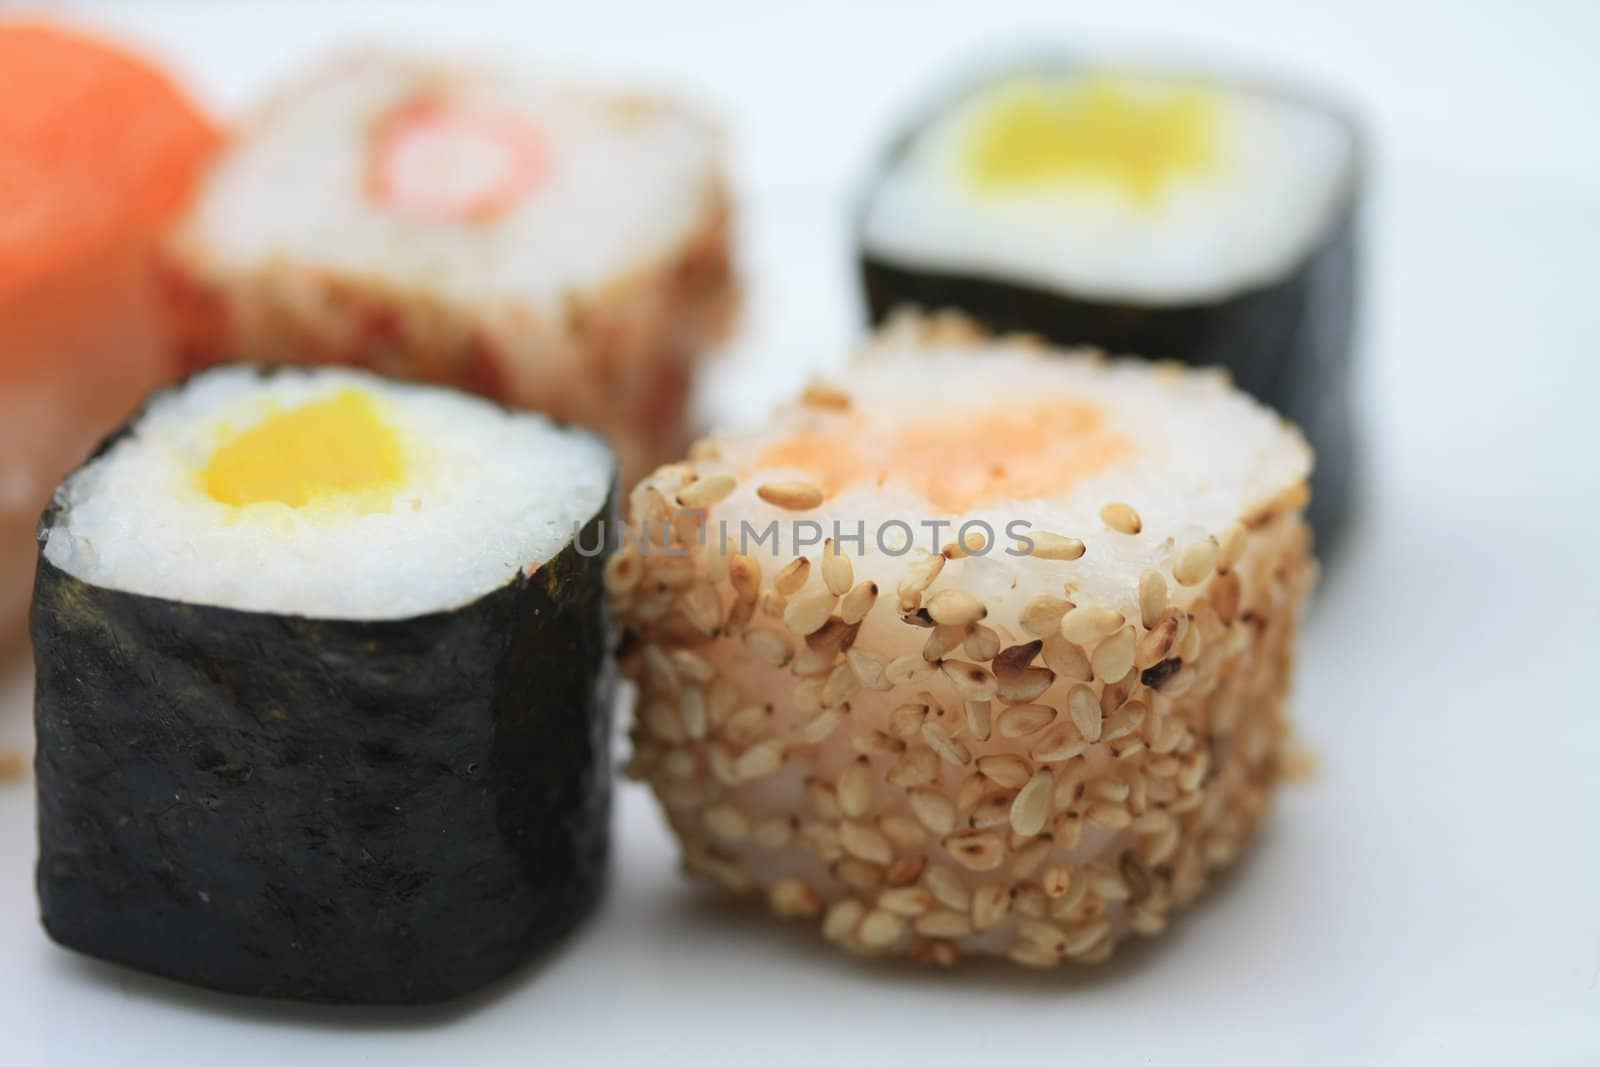 traditional Japanese sushi, rolled in seaweed, made from different sorts of raw fish